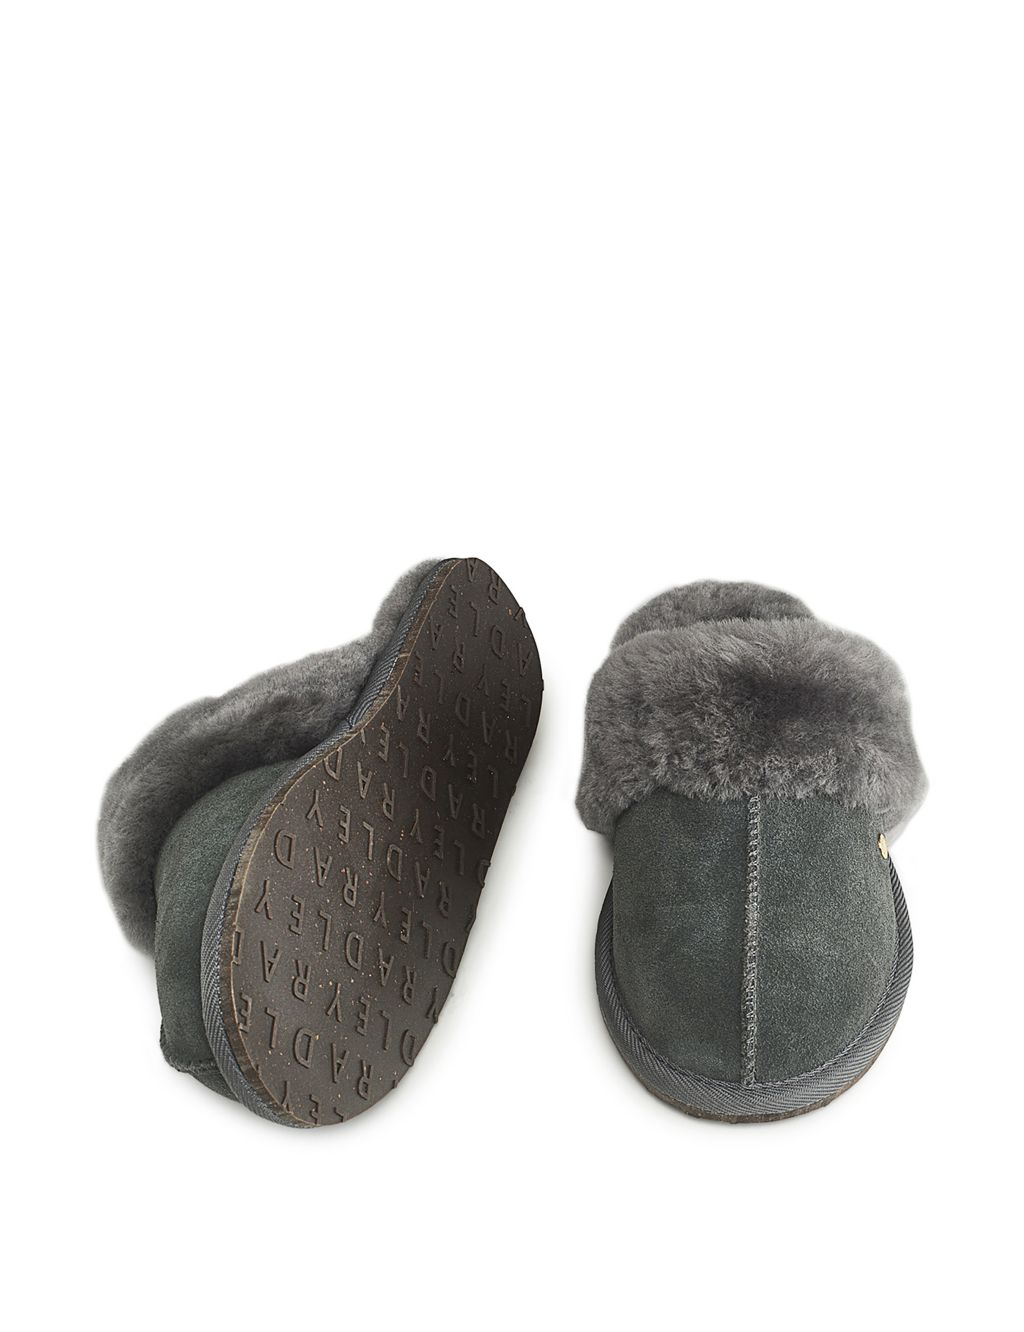 Suede Shearling Mule Slippers image 3